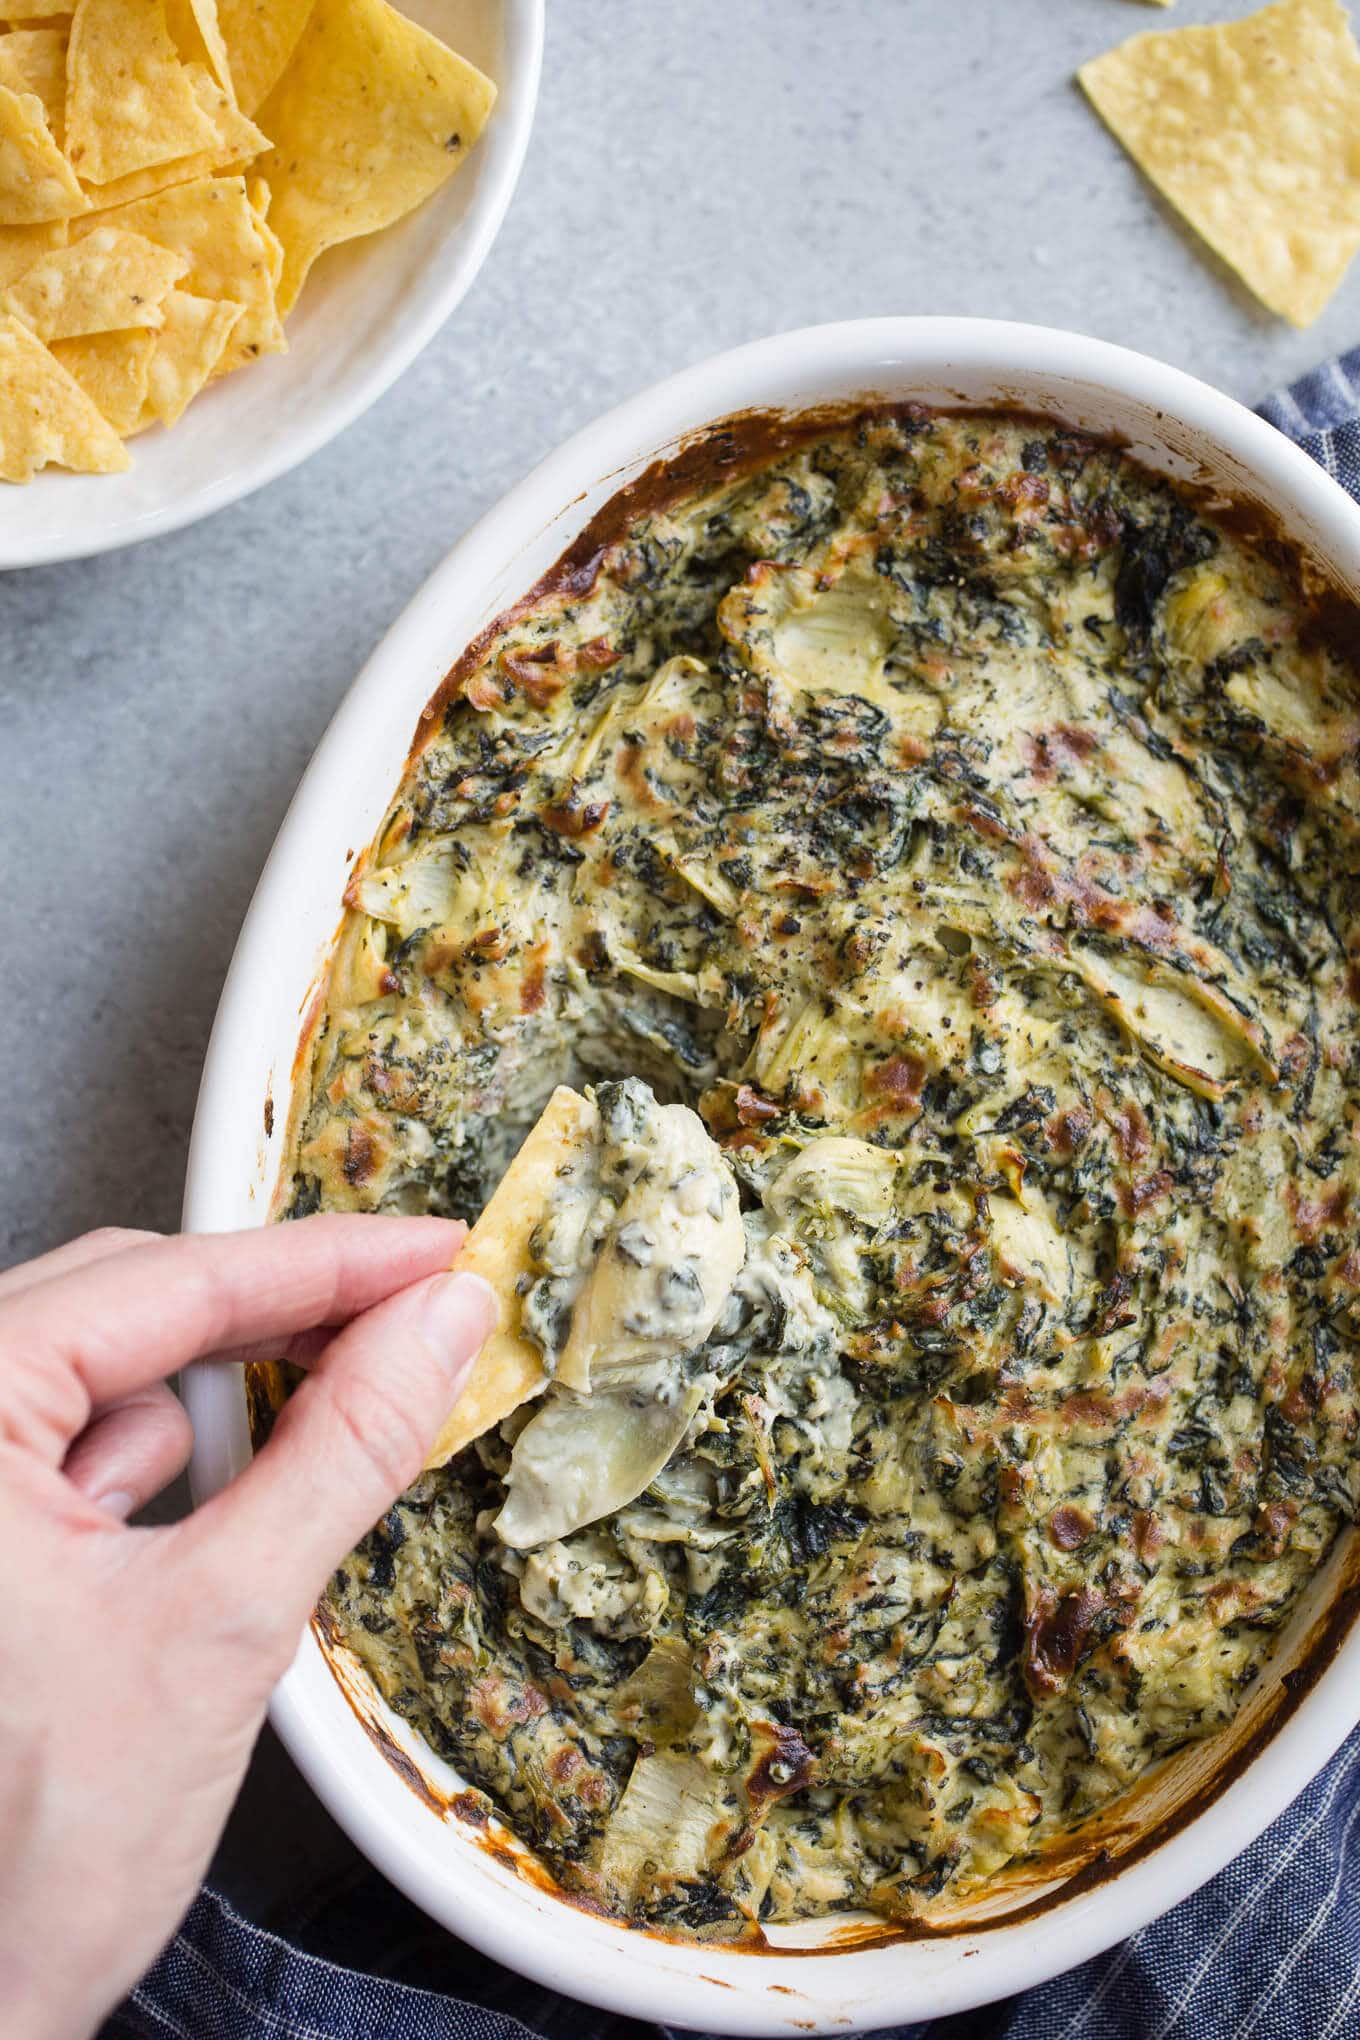 Baked Vegan Spinach Artichoke Dip is made dairy-free with a cashew cream base. An easy appetizer dip recipe for a crowd. 